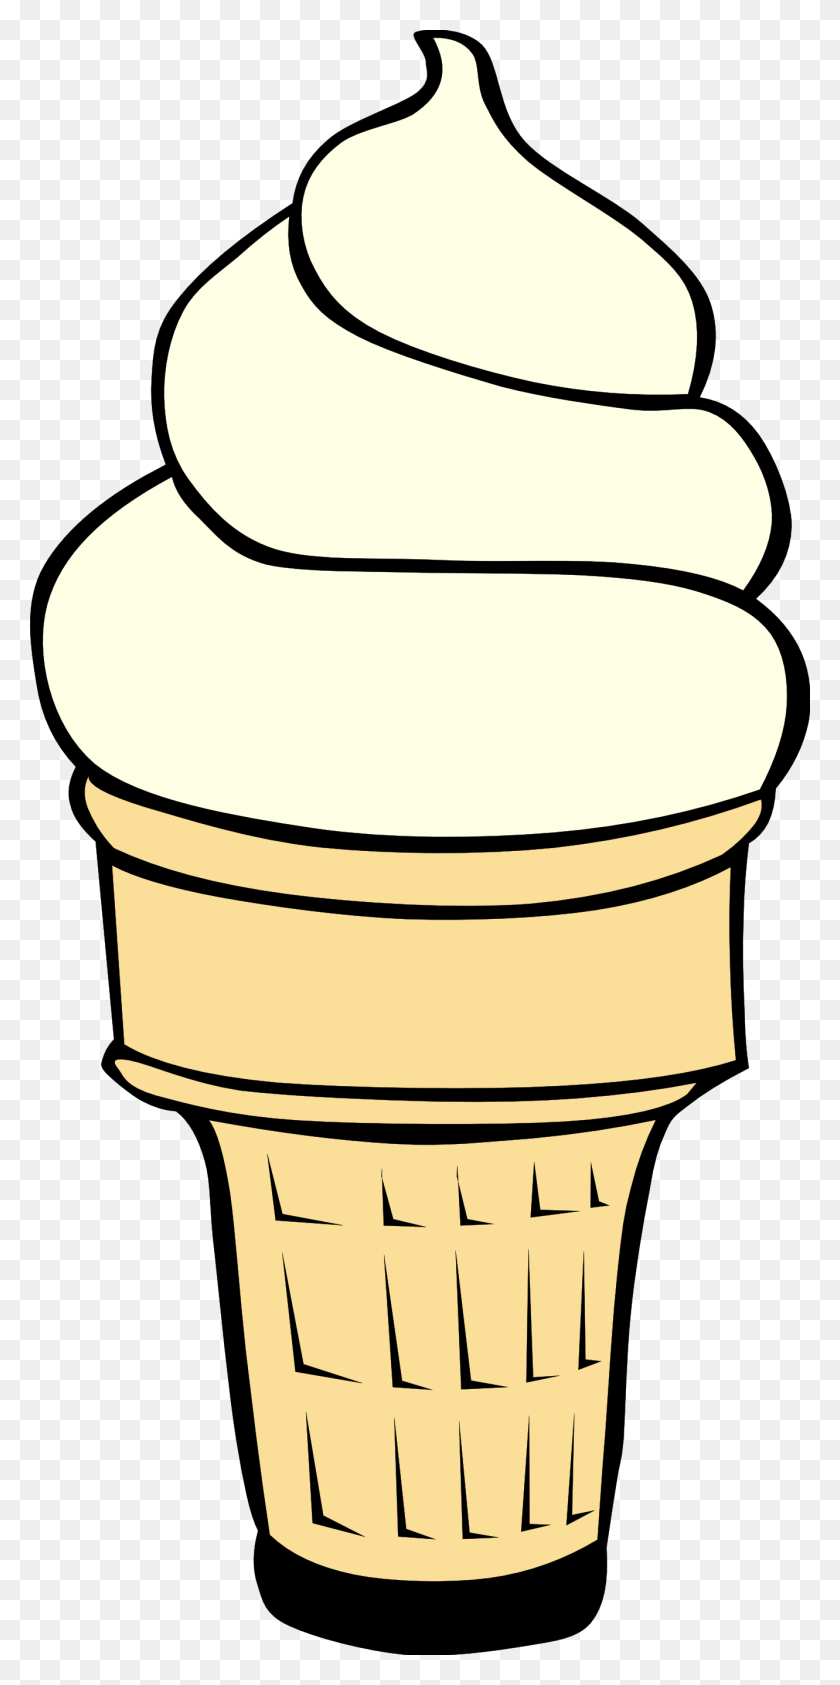 1331x2773 Ice Cream Clip Art Pictures Free Vector For Free Download - Upcoming Events Clipart